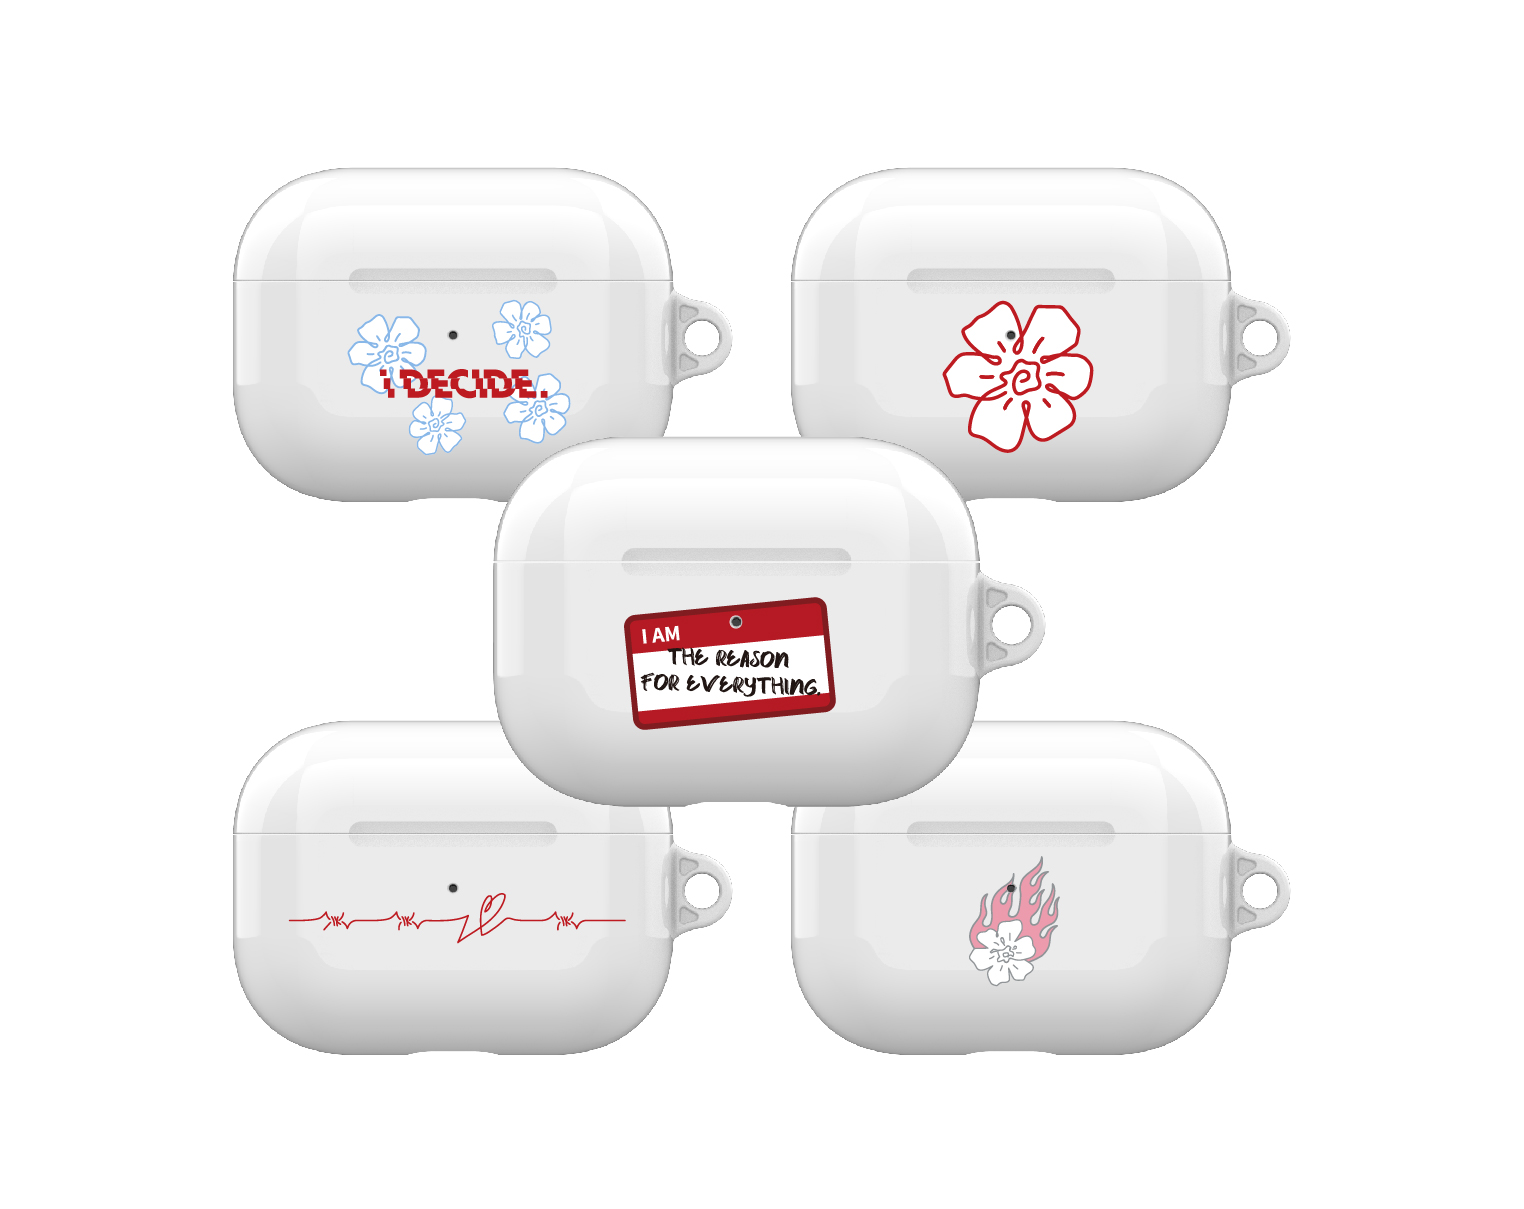 [TRADIT] iKON iDECIDE AIRPODS PRO CASE